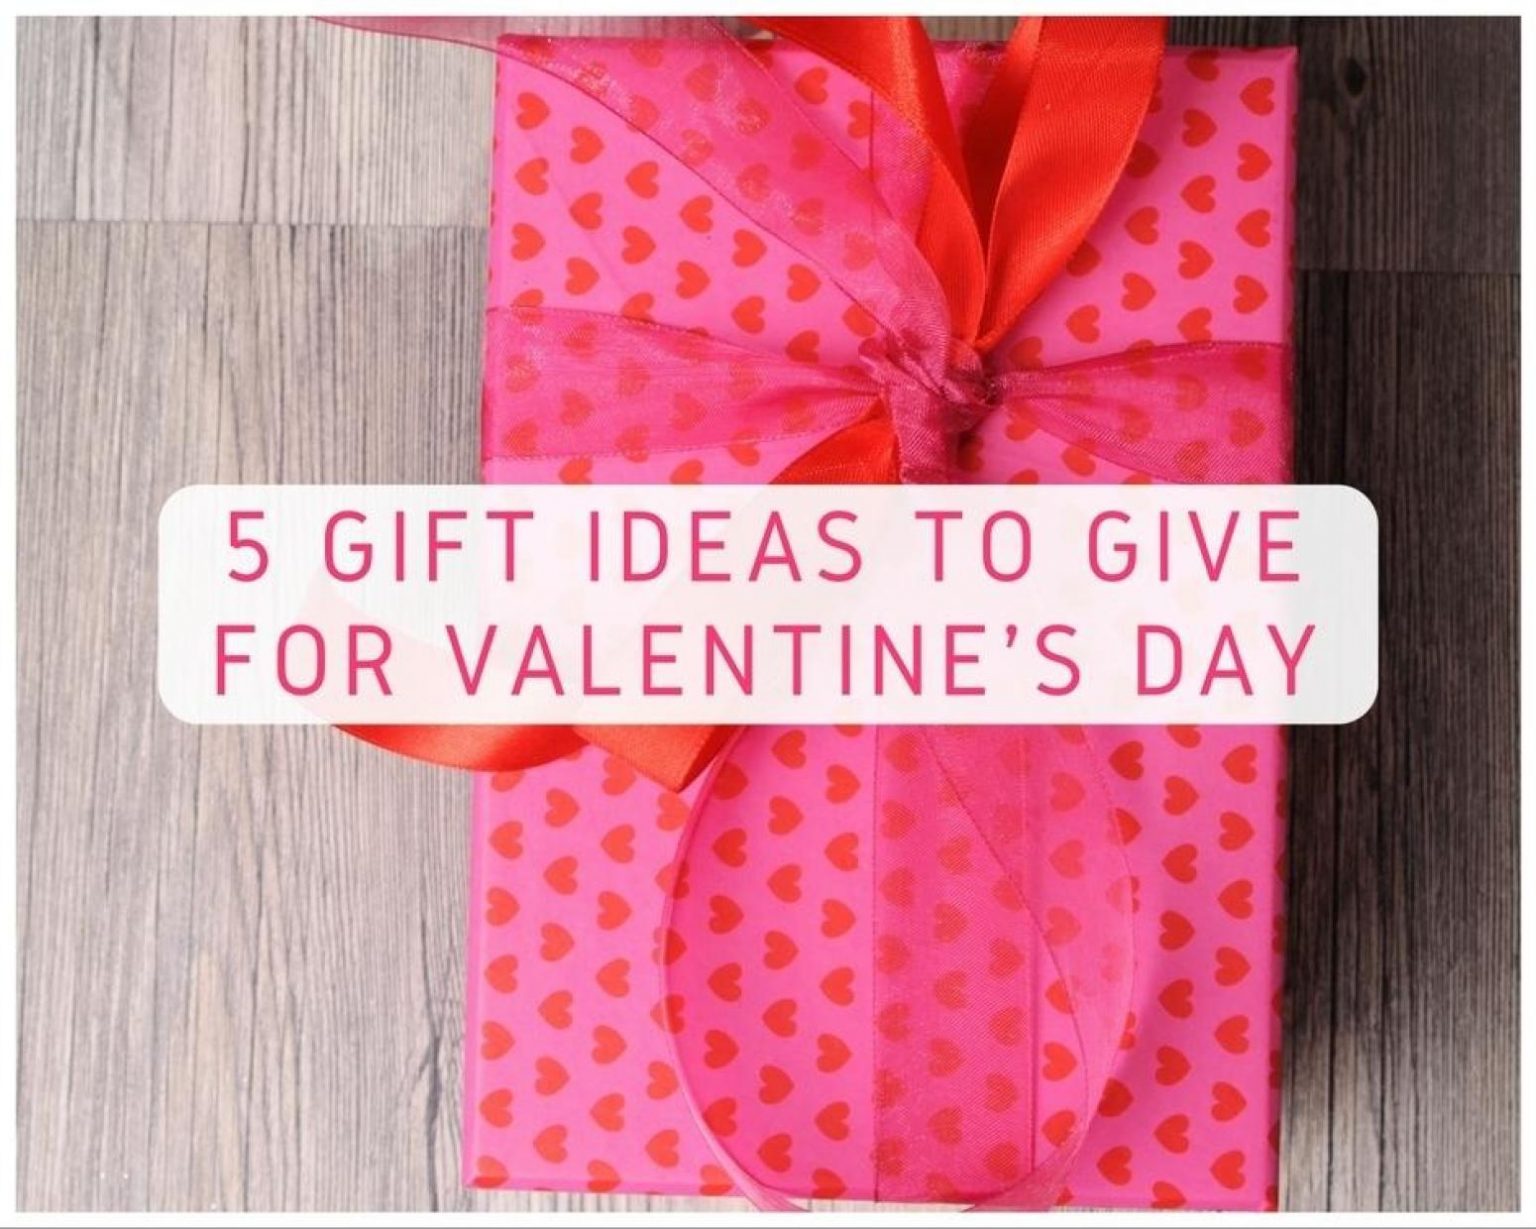 5 Gift Ideas to Give for Valentine’s Day - Just A Pinch